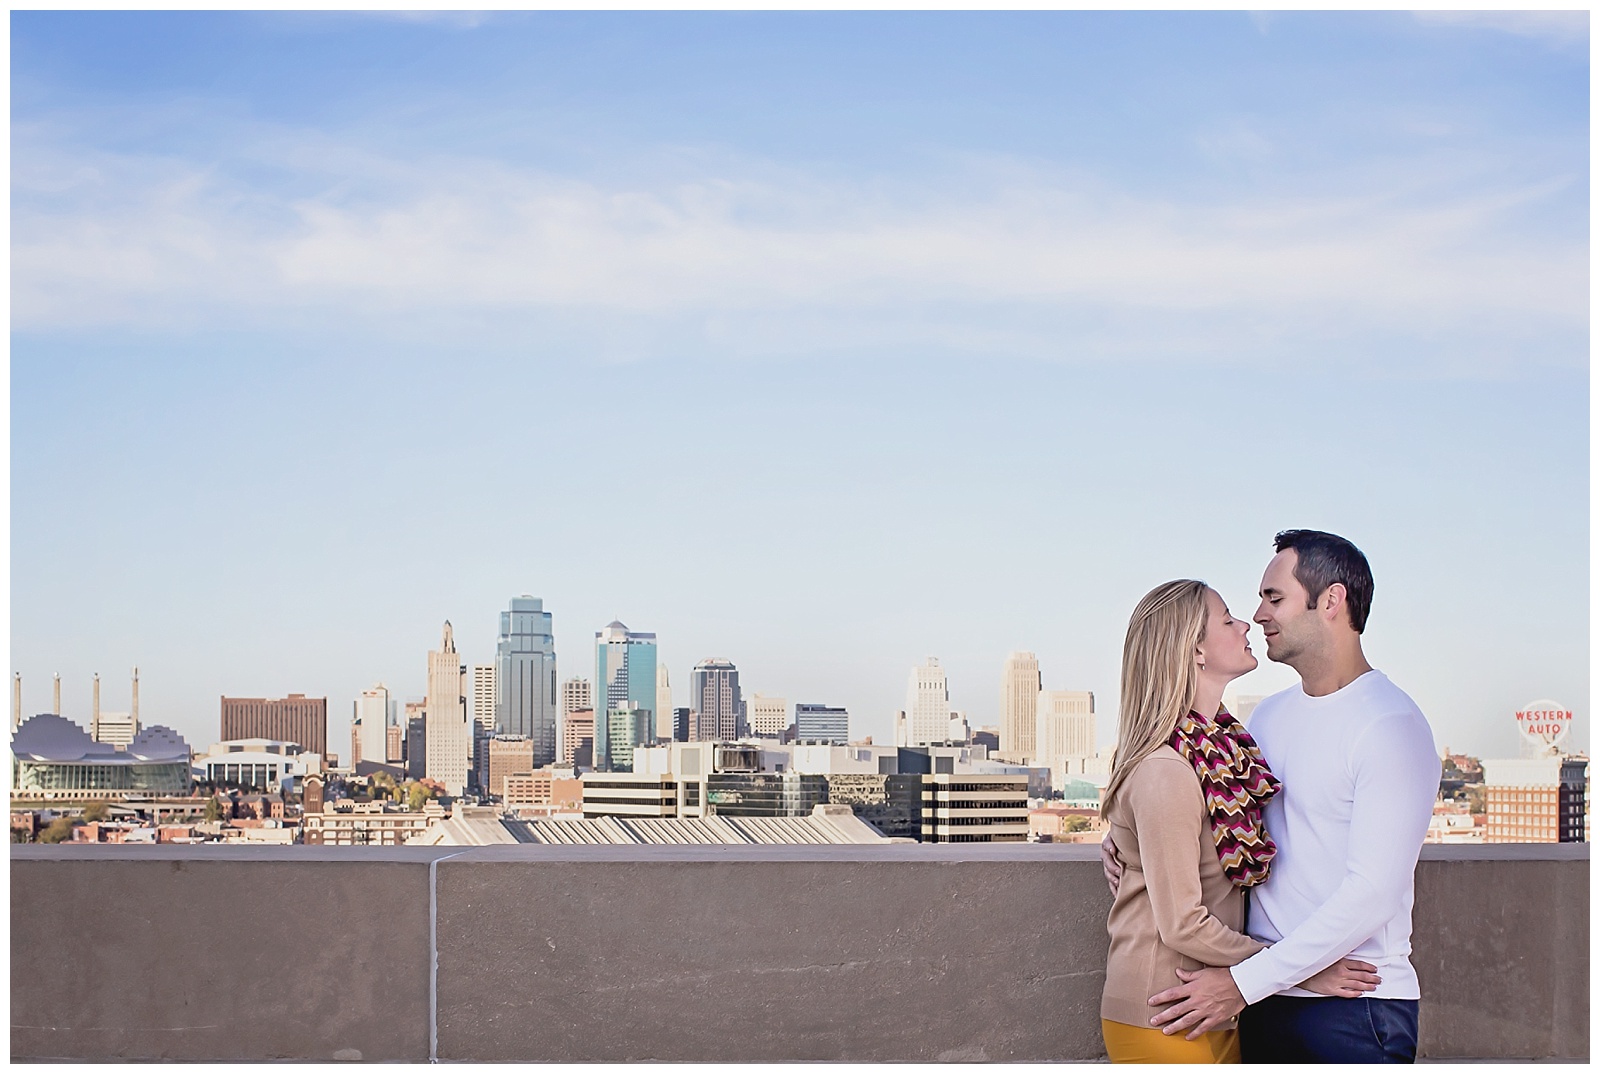 An engagement session at Liberty Memorial in Kansas City.